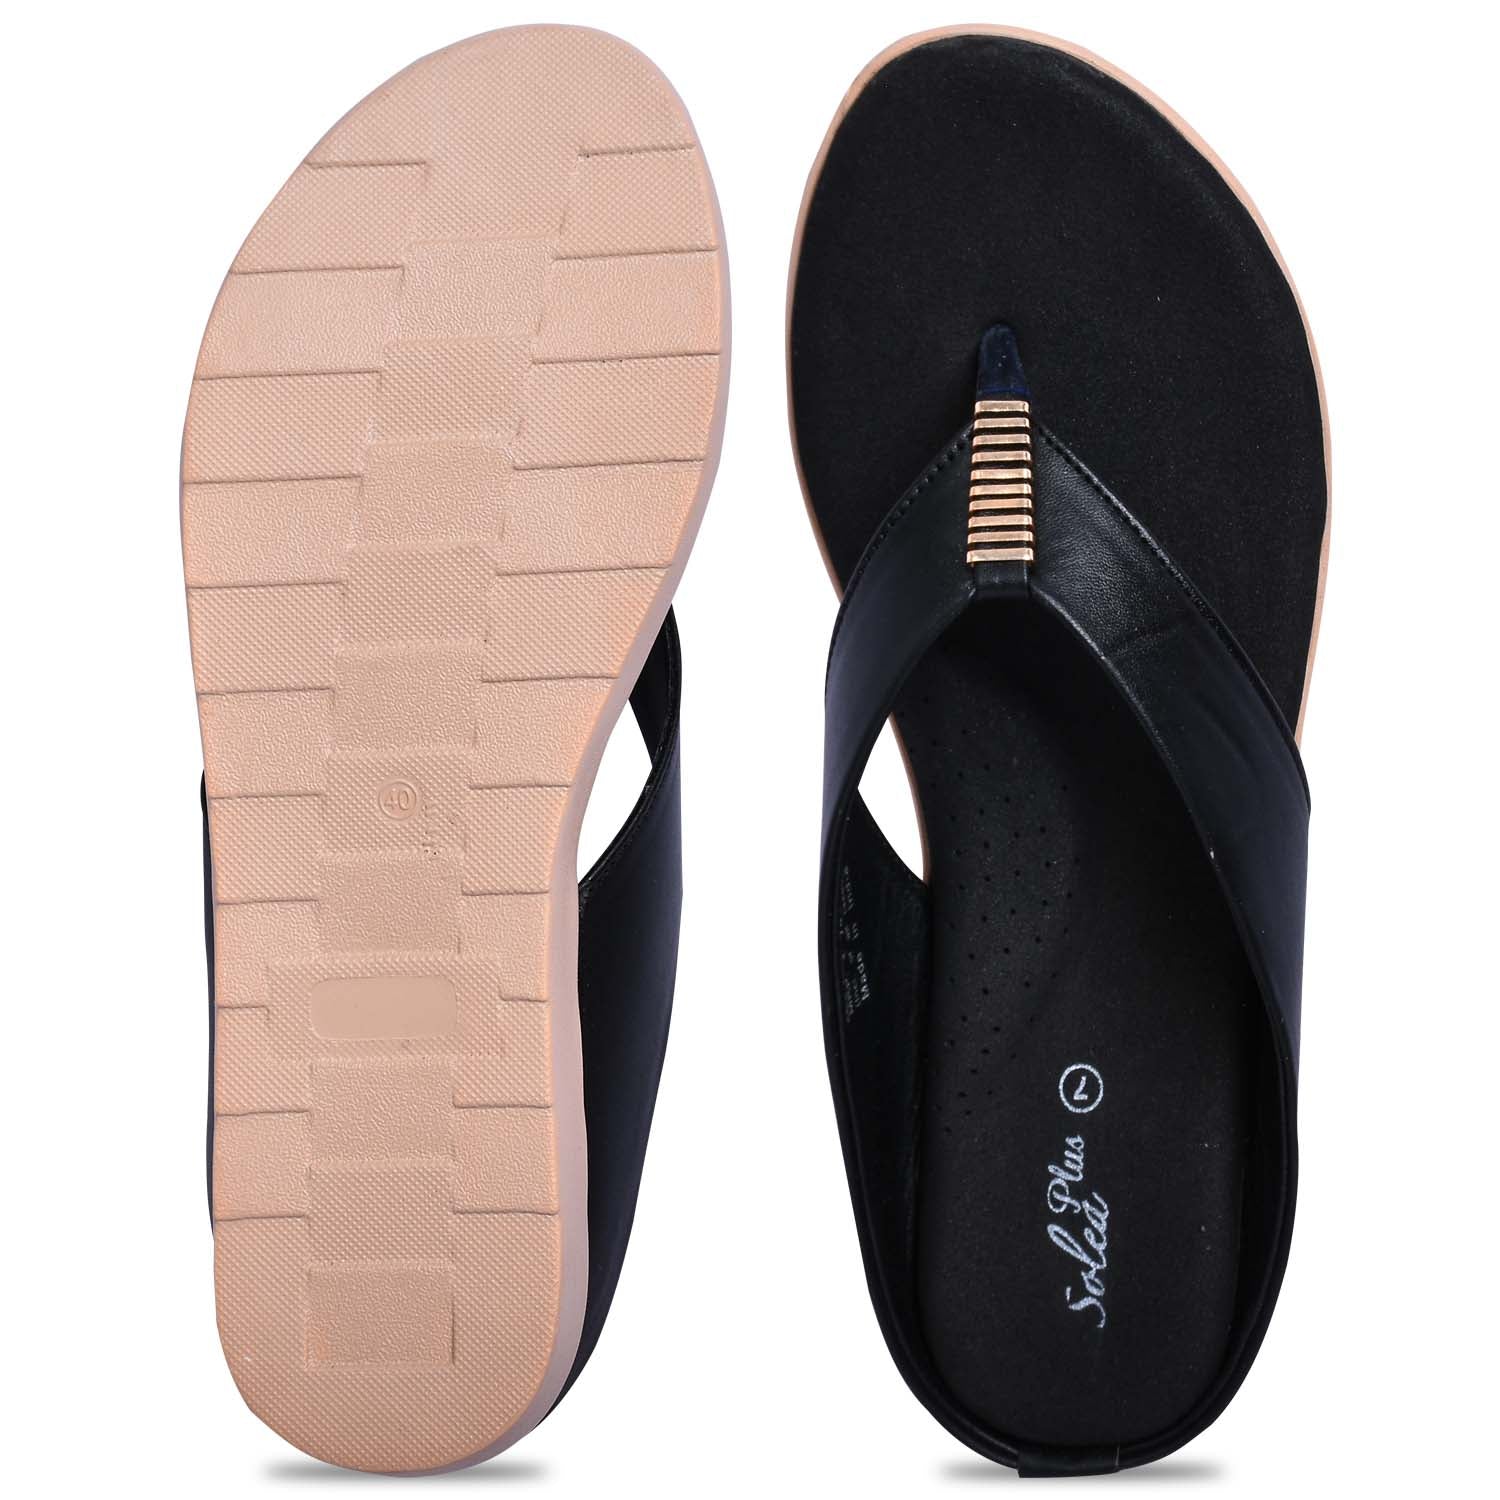 Paragon R1020L Women Sandals | Casual &amp; Formal Sandals | Stylish, Comfortable &amp; Durable | For Daily &amp; Occasion Wear